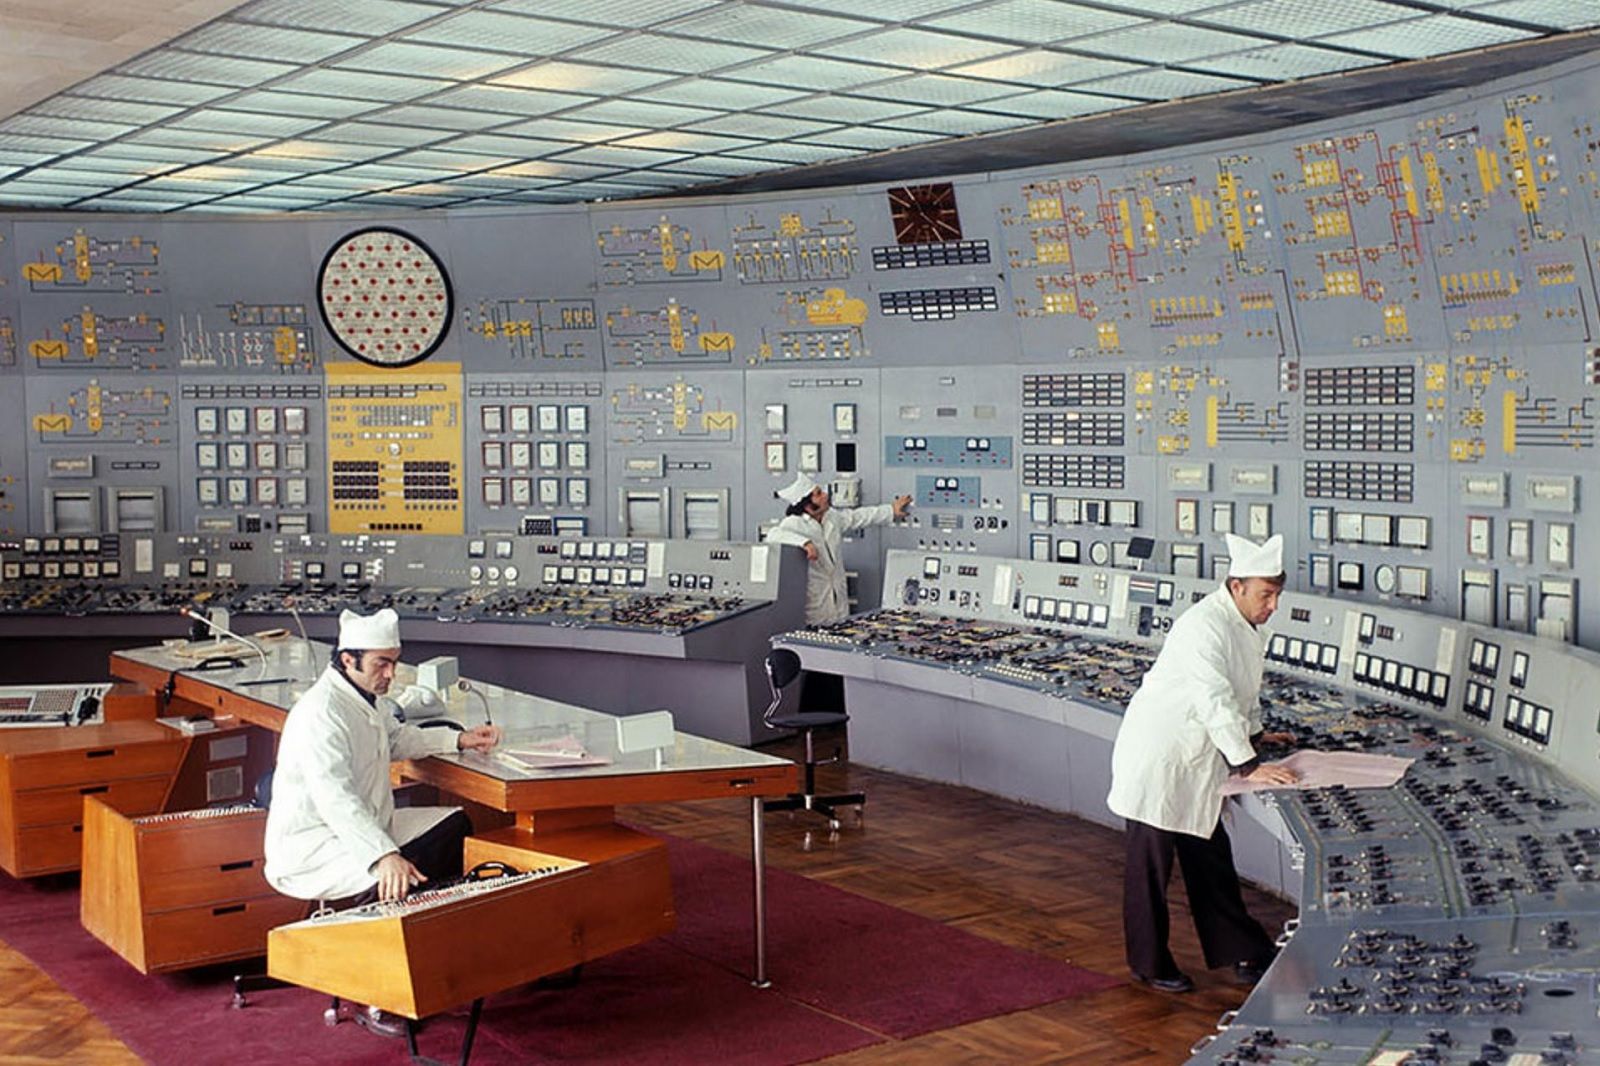 Satisfying photos of classic control rooms that once ran the world image 2